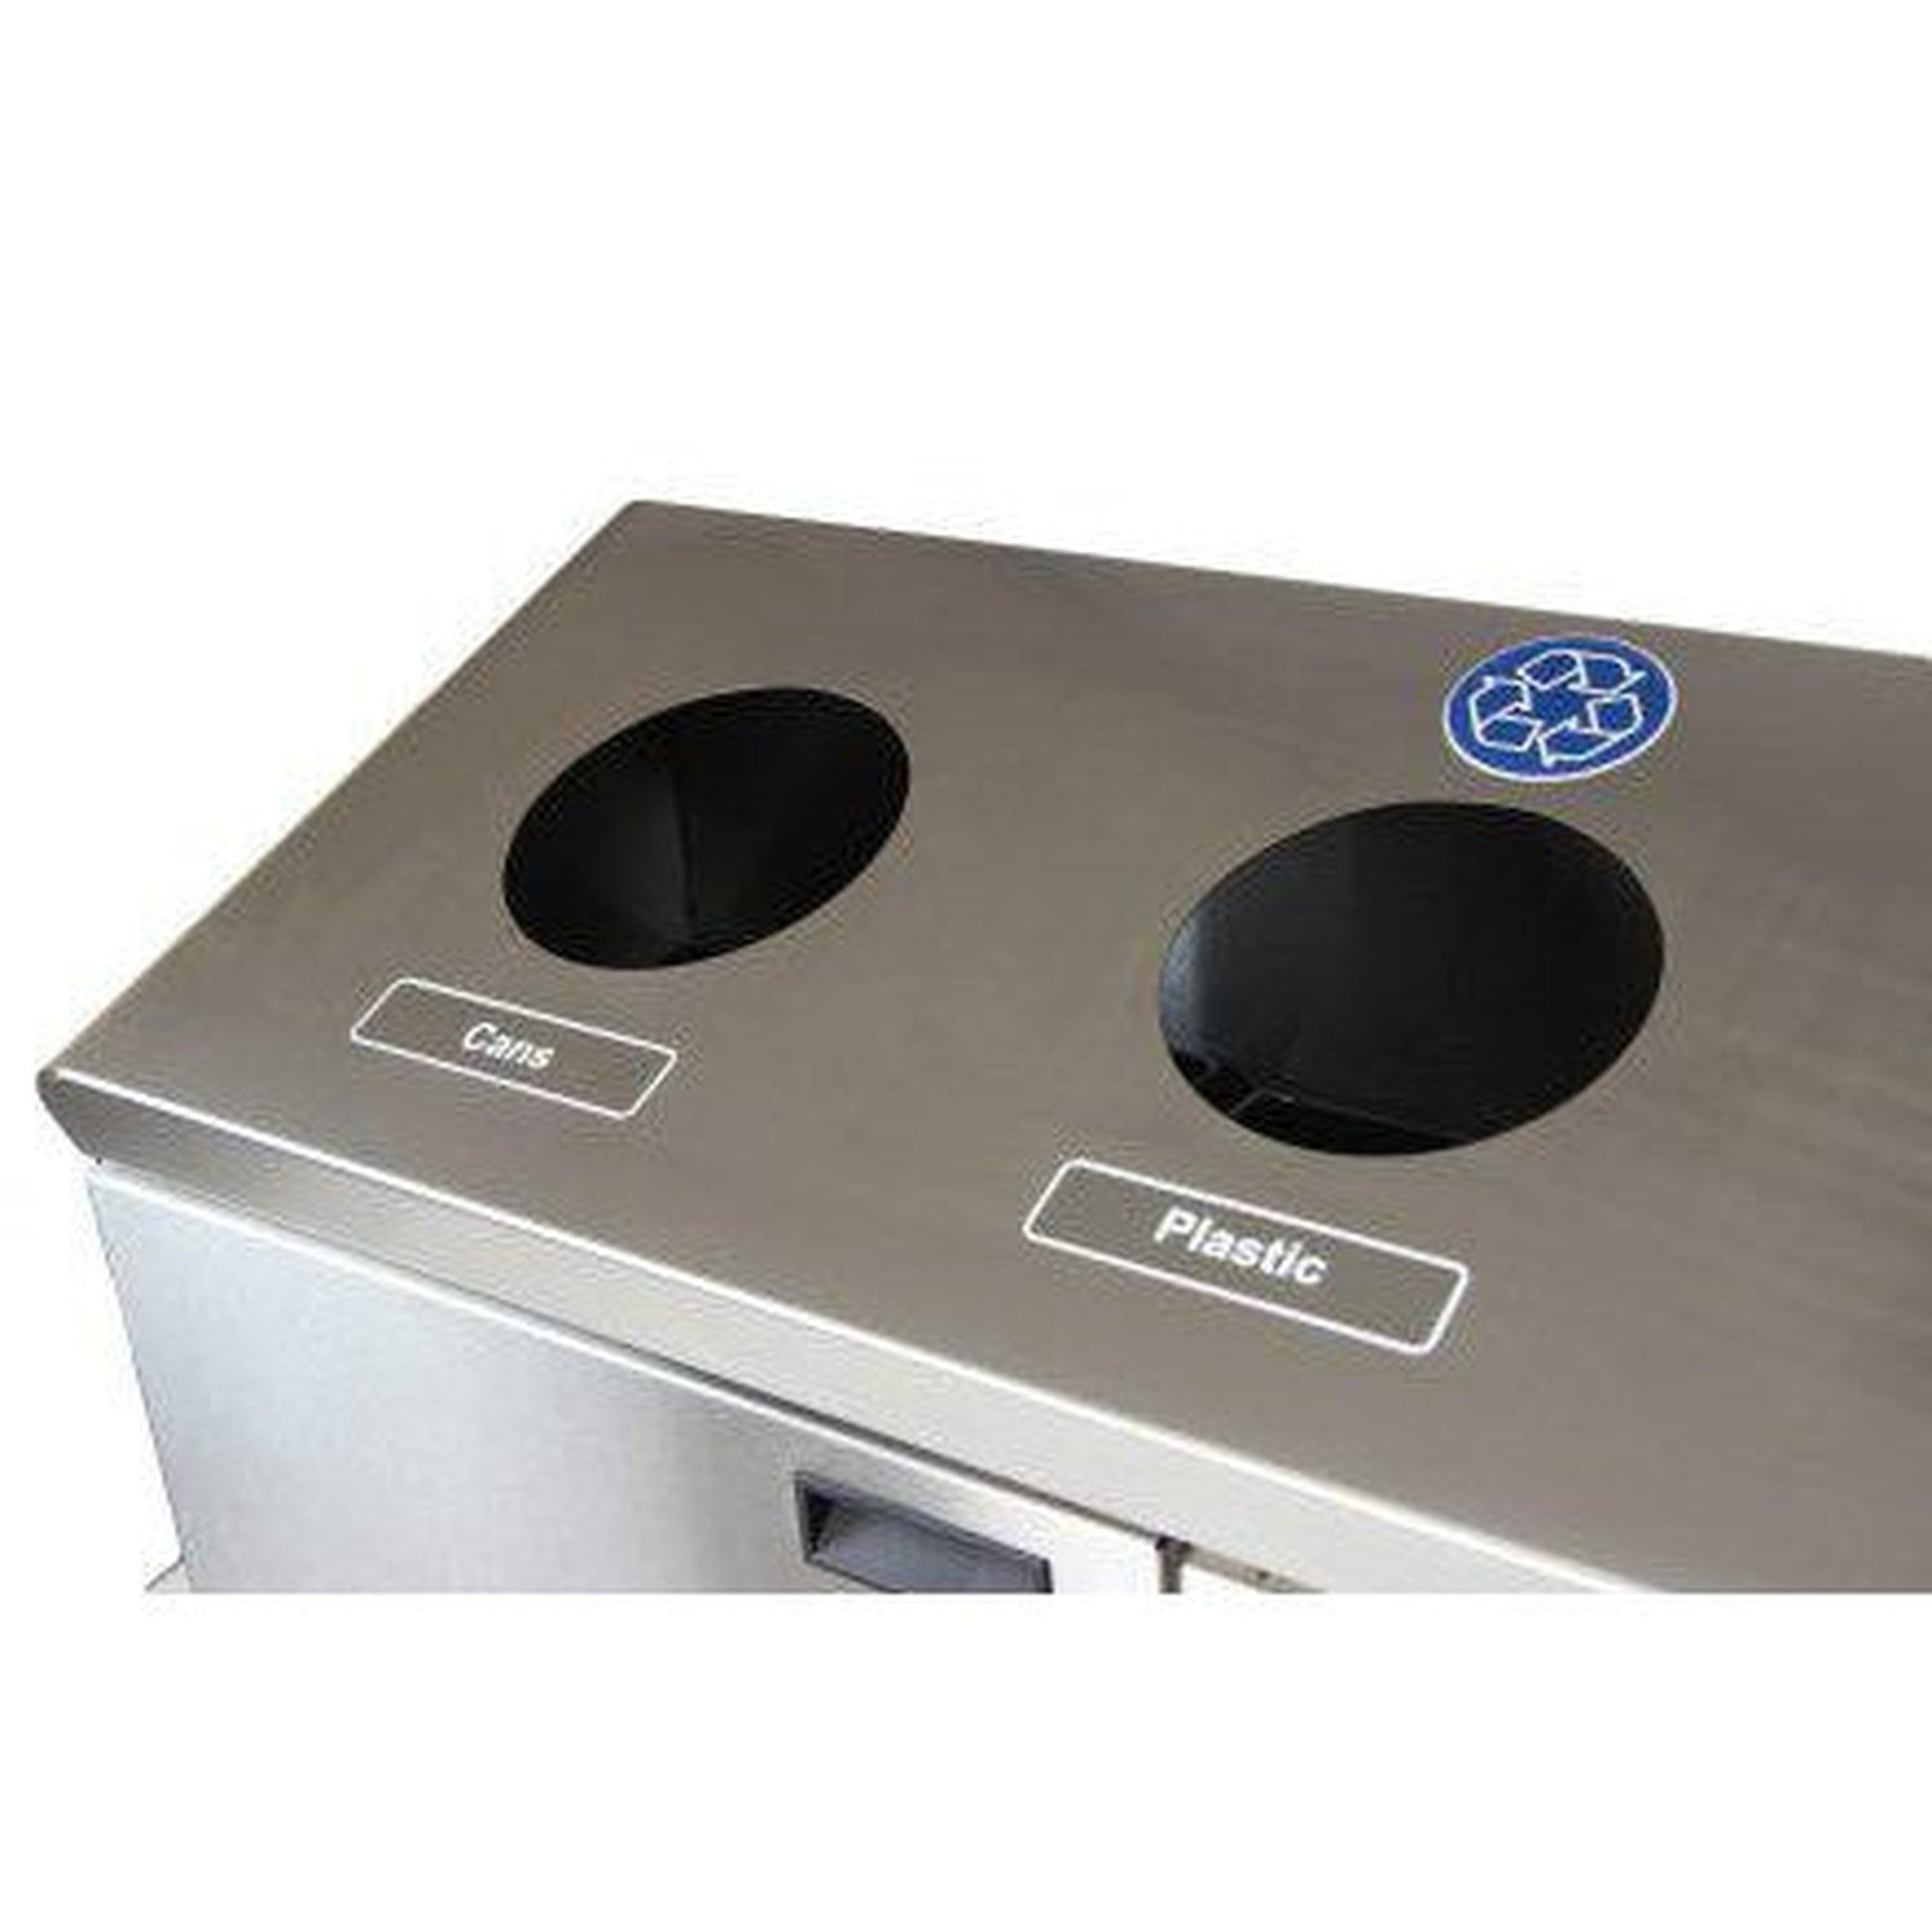 Frost 36.6 x 14 x 40.1 Stainless Steel Satin Waste Receptacles